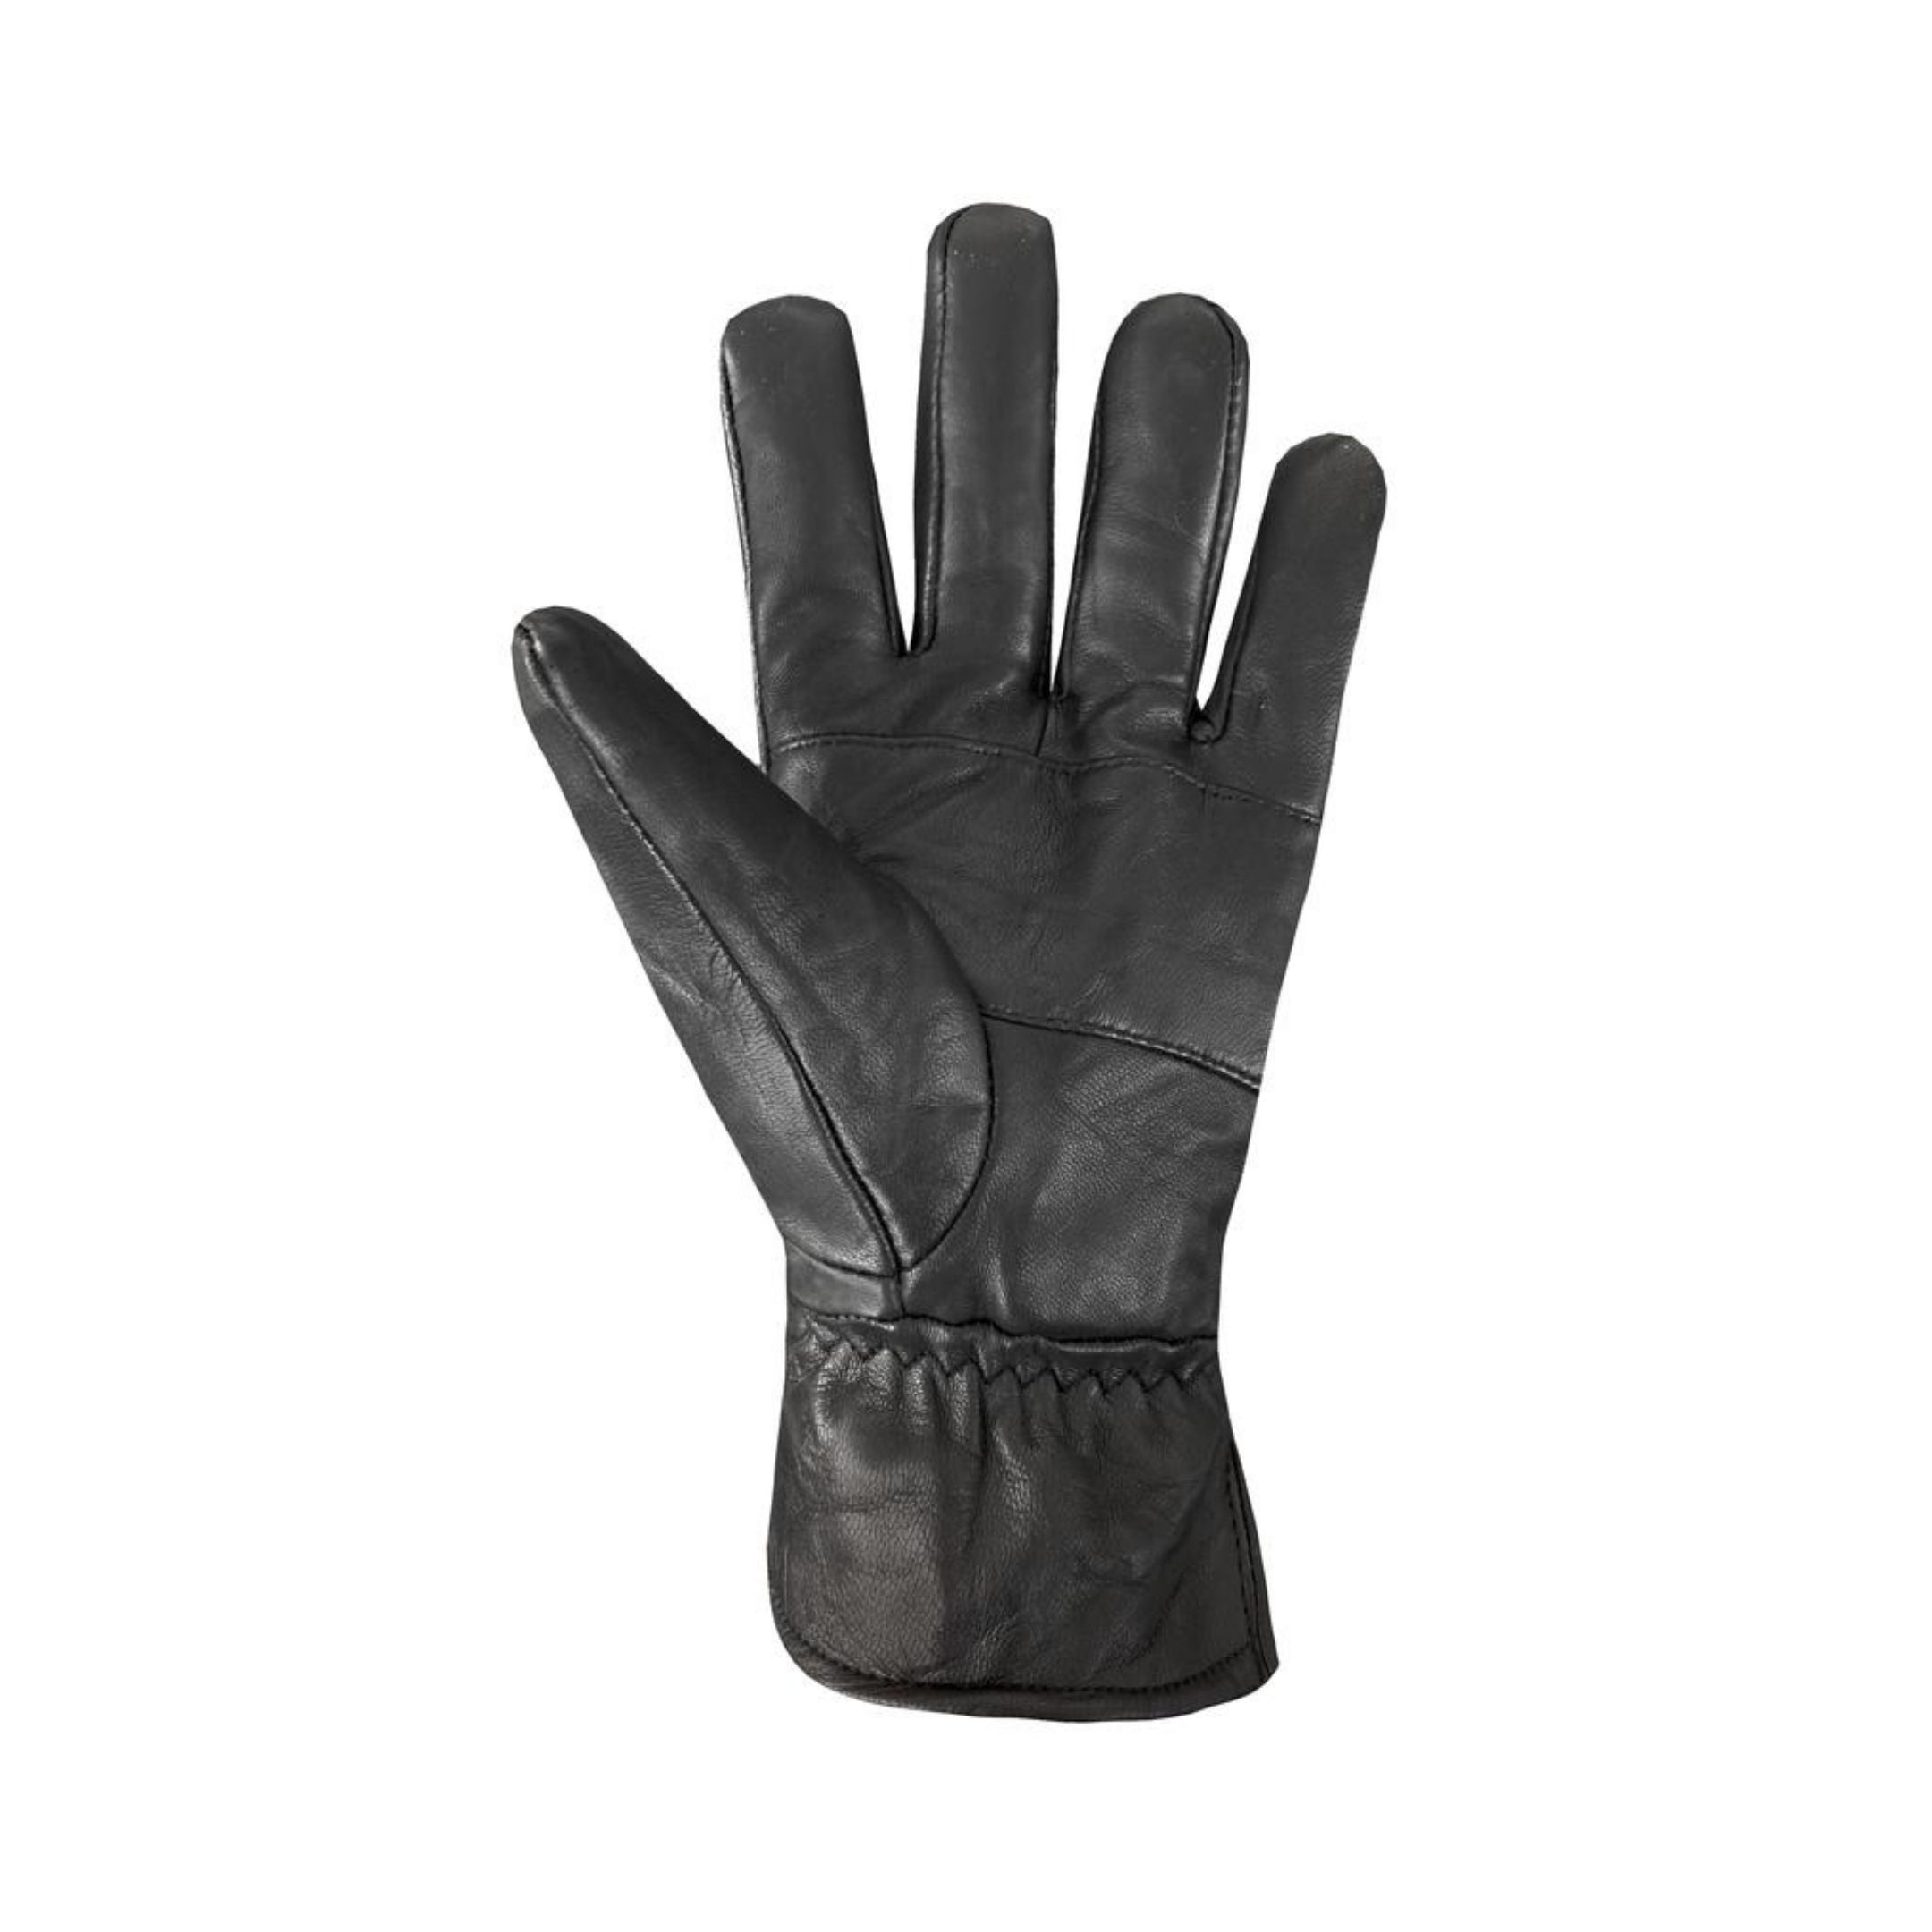 Palm side of black leather gloves with detail stitching and gathered at cuff.